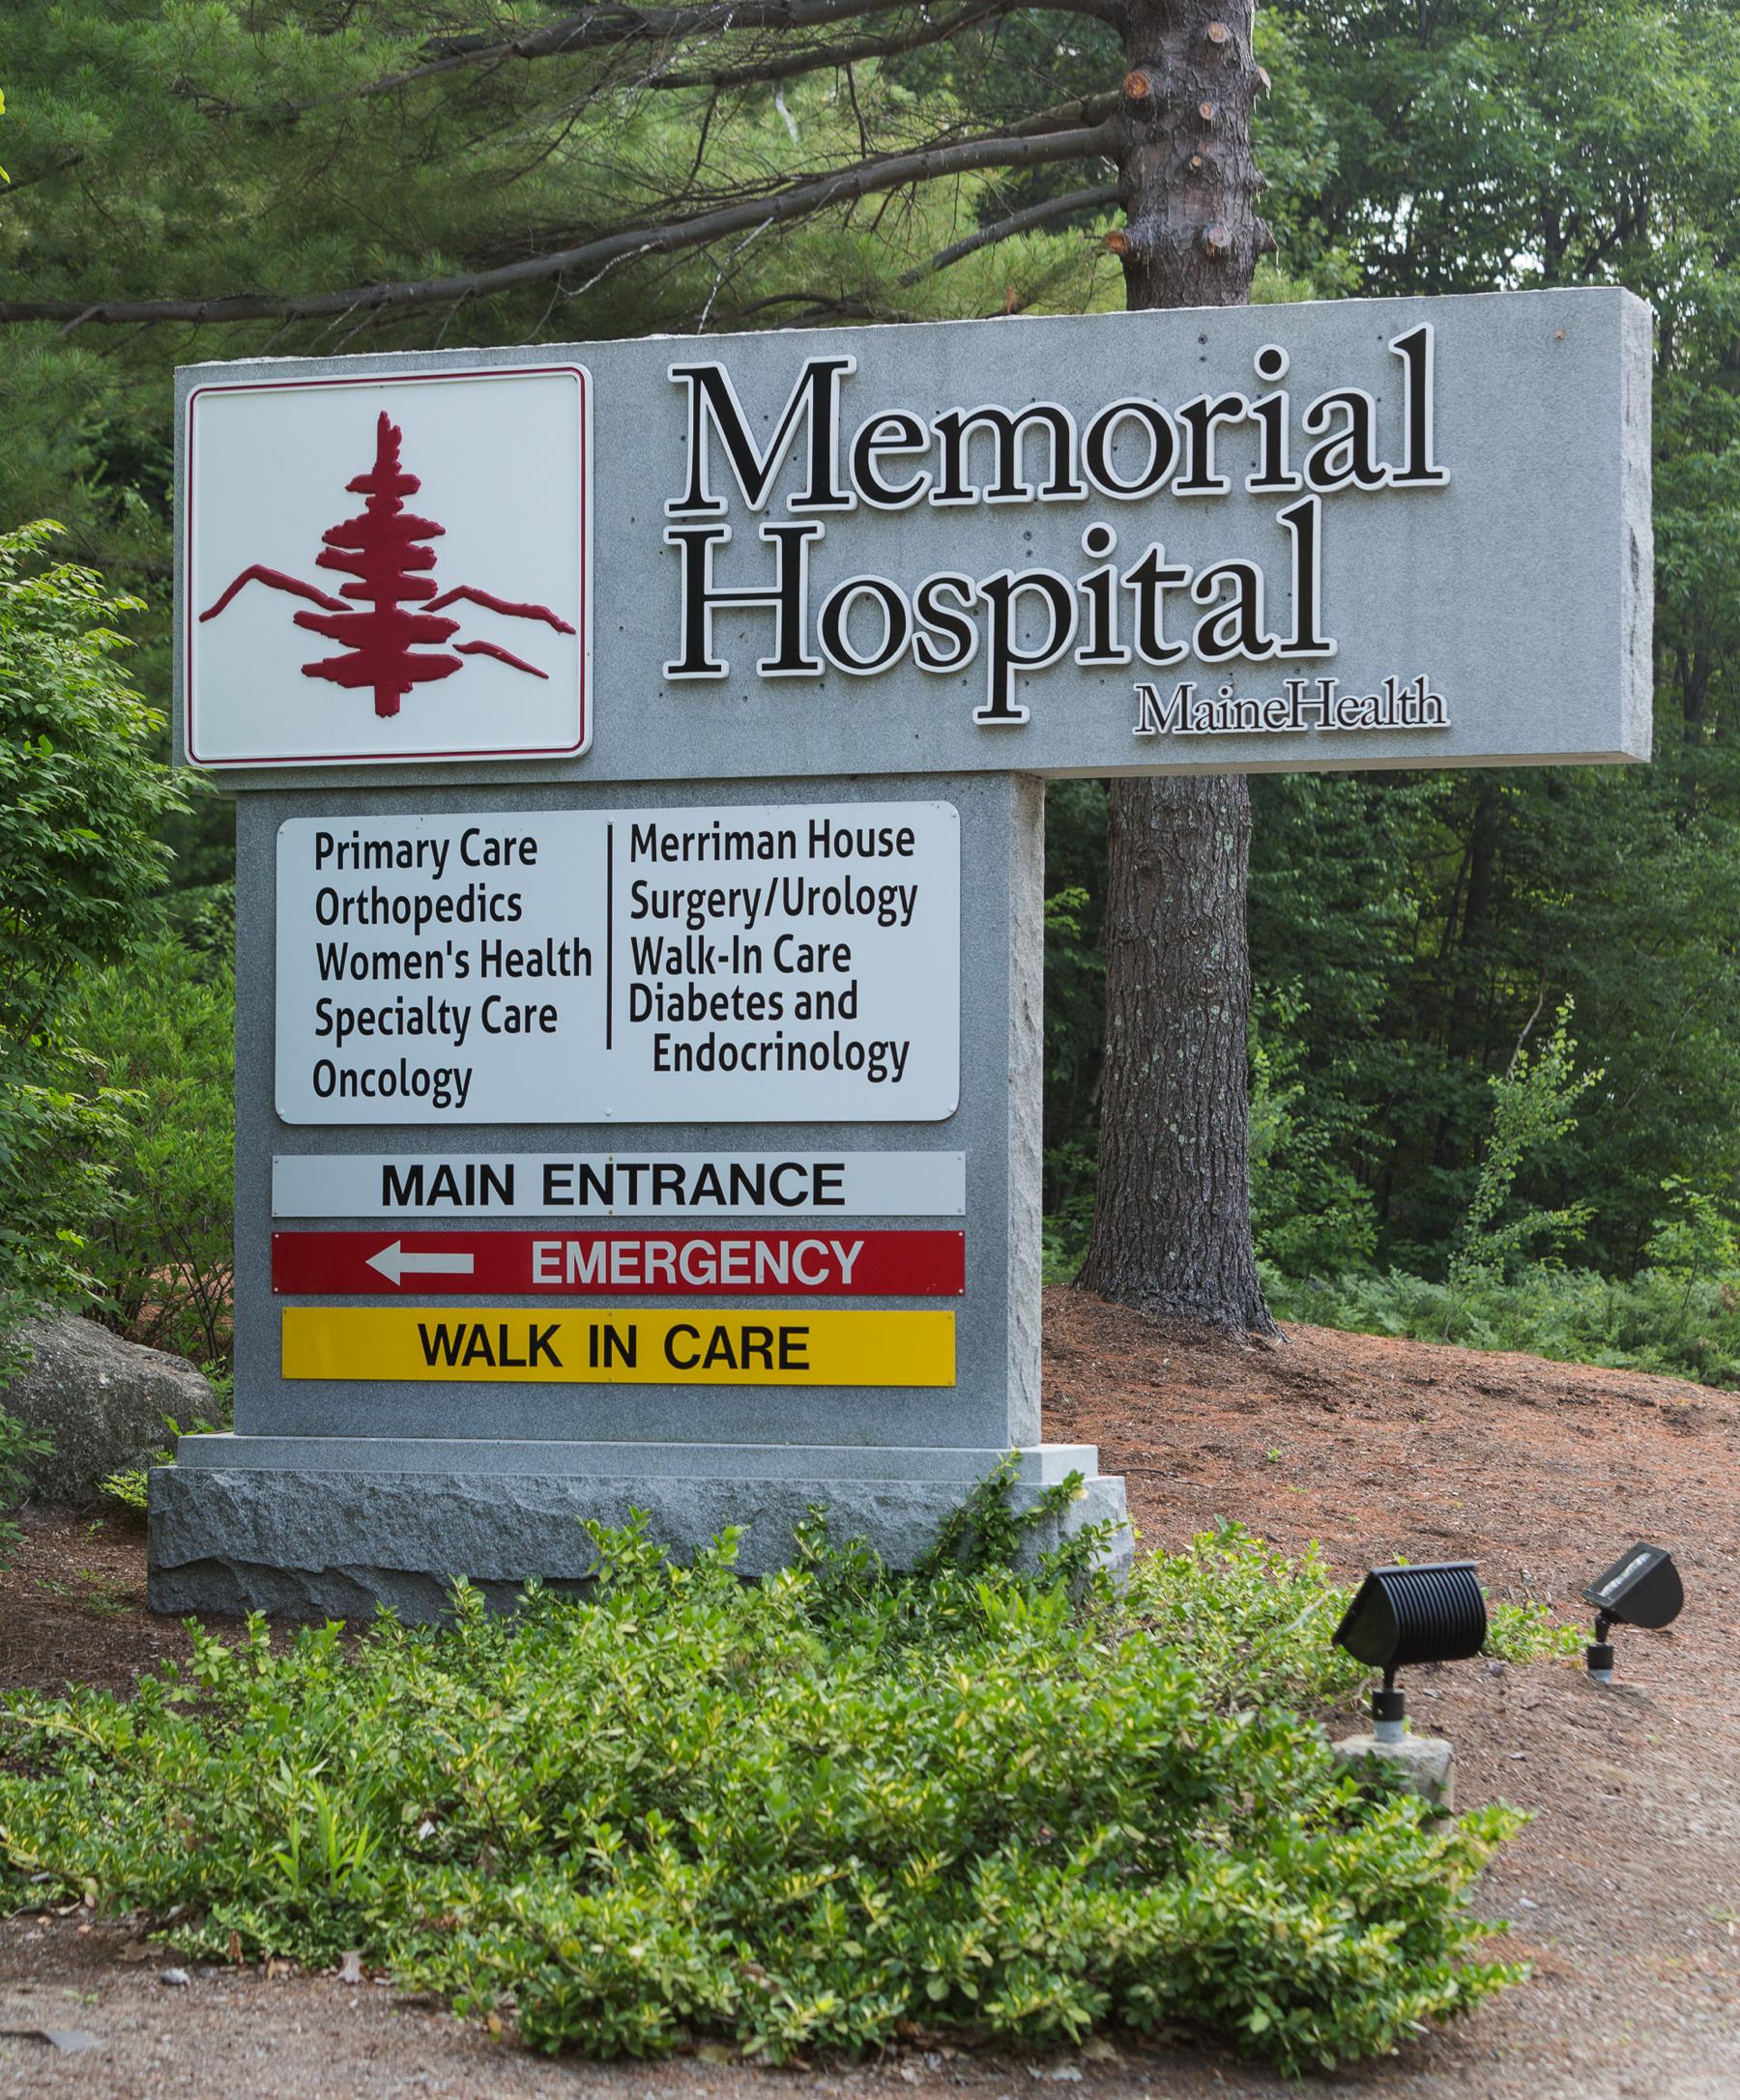 Physicians At Memorial Hospital Are Located At 3073 White Mountain Highway, North Conway, NH